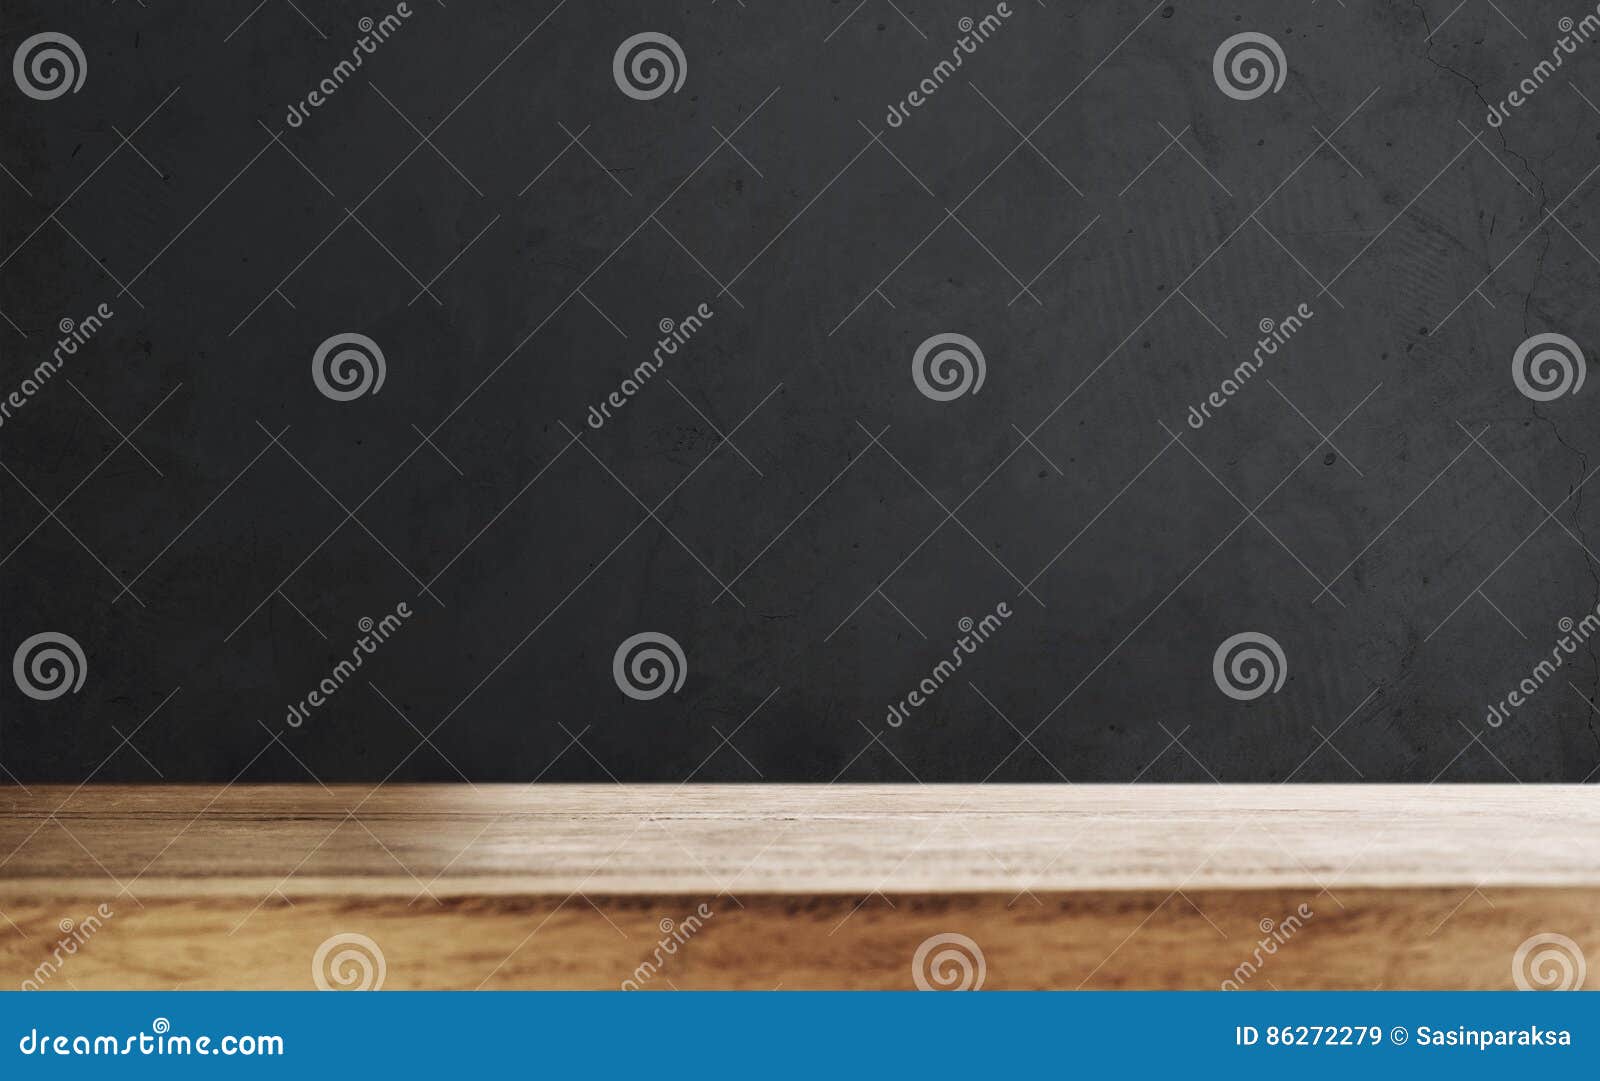 wooden table top with defocus black wall background